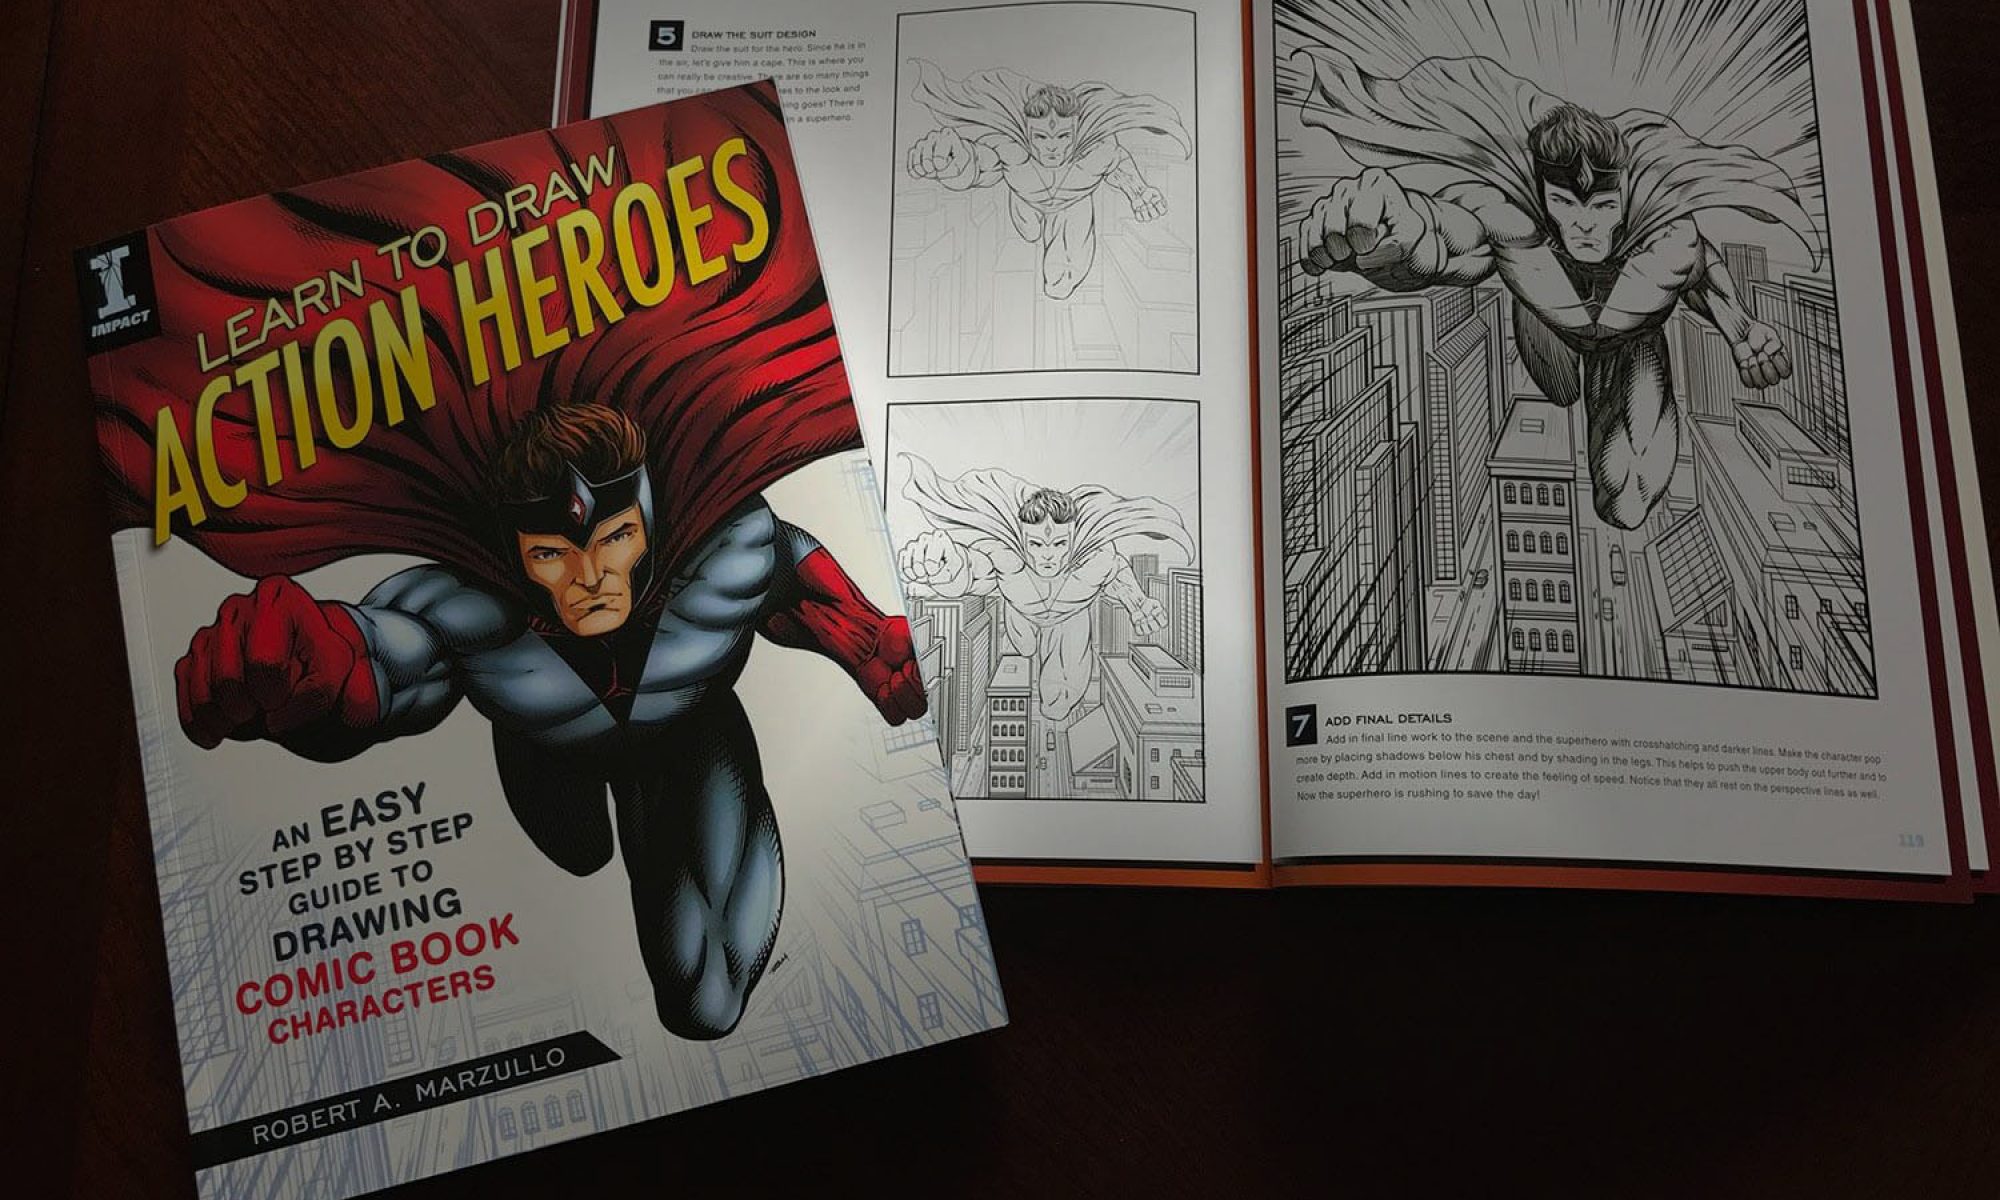 https://learntodrawactionheroes.com/wp-content/uploads/2020/03/cropped-Learn_to_Draw_Action_Heroes_Book_for_Artists_2.jpg